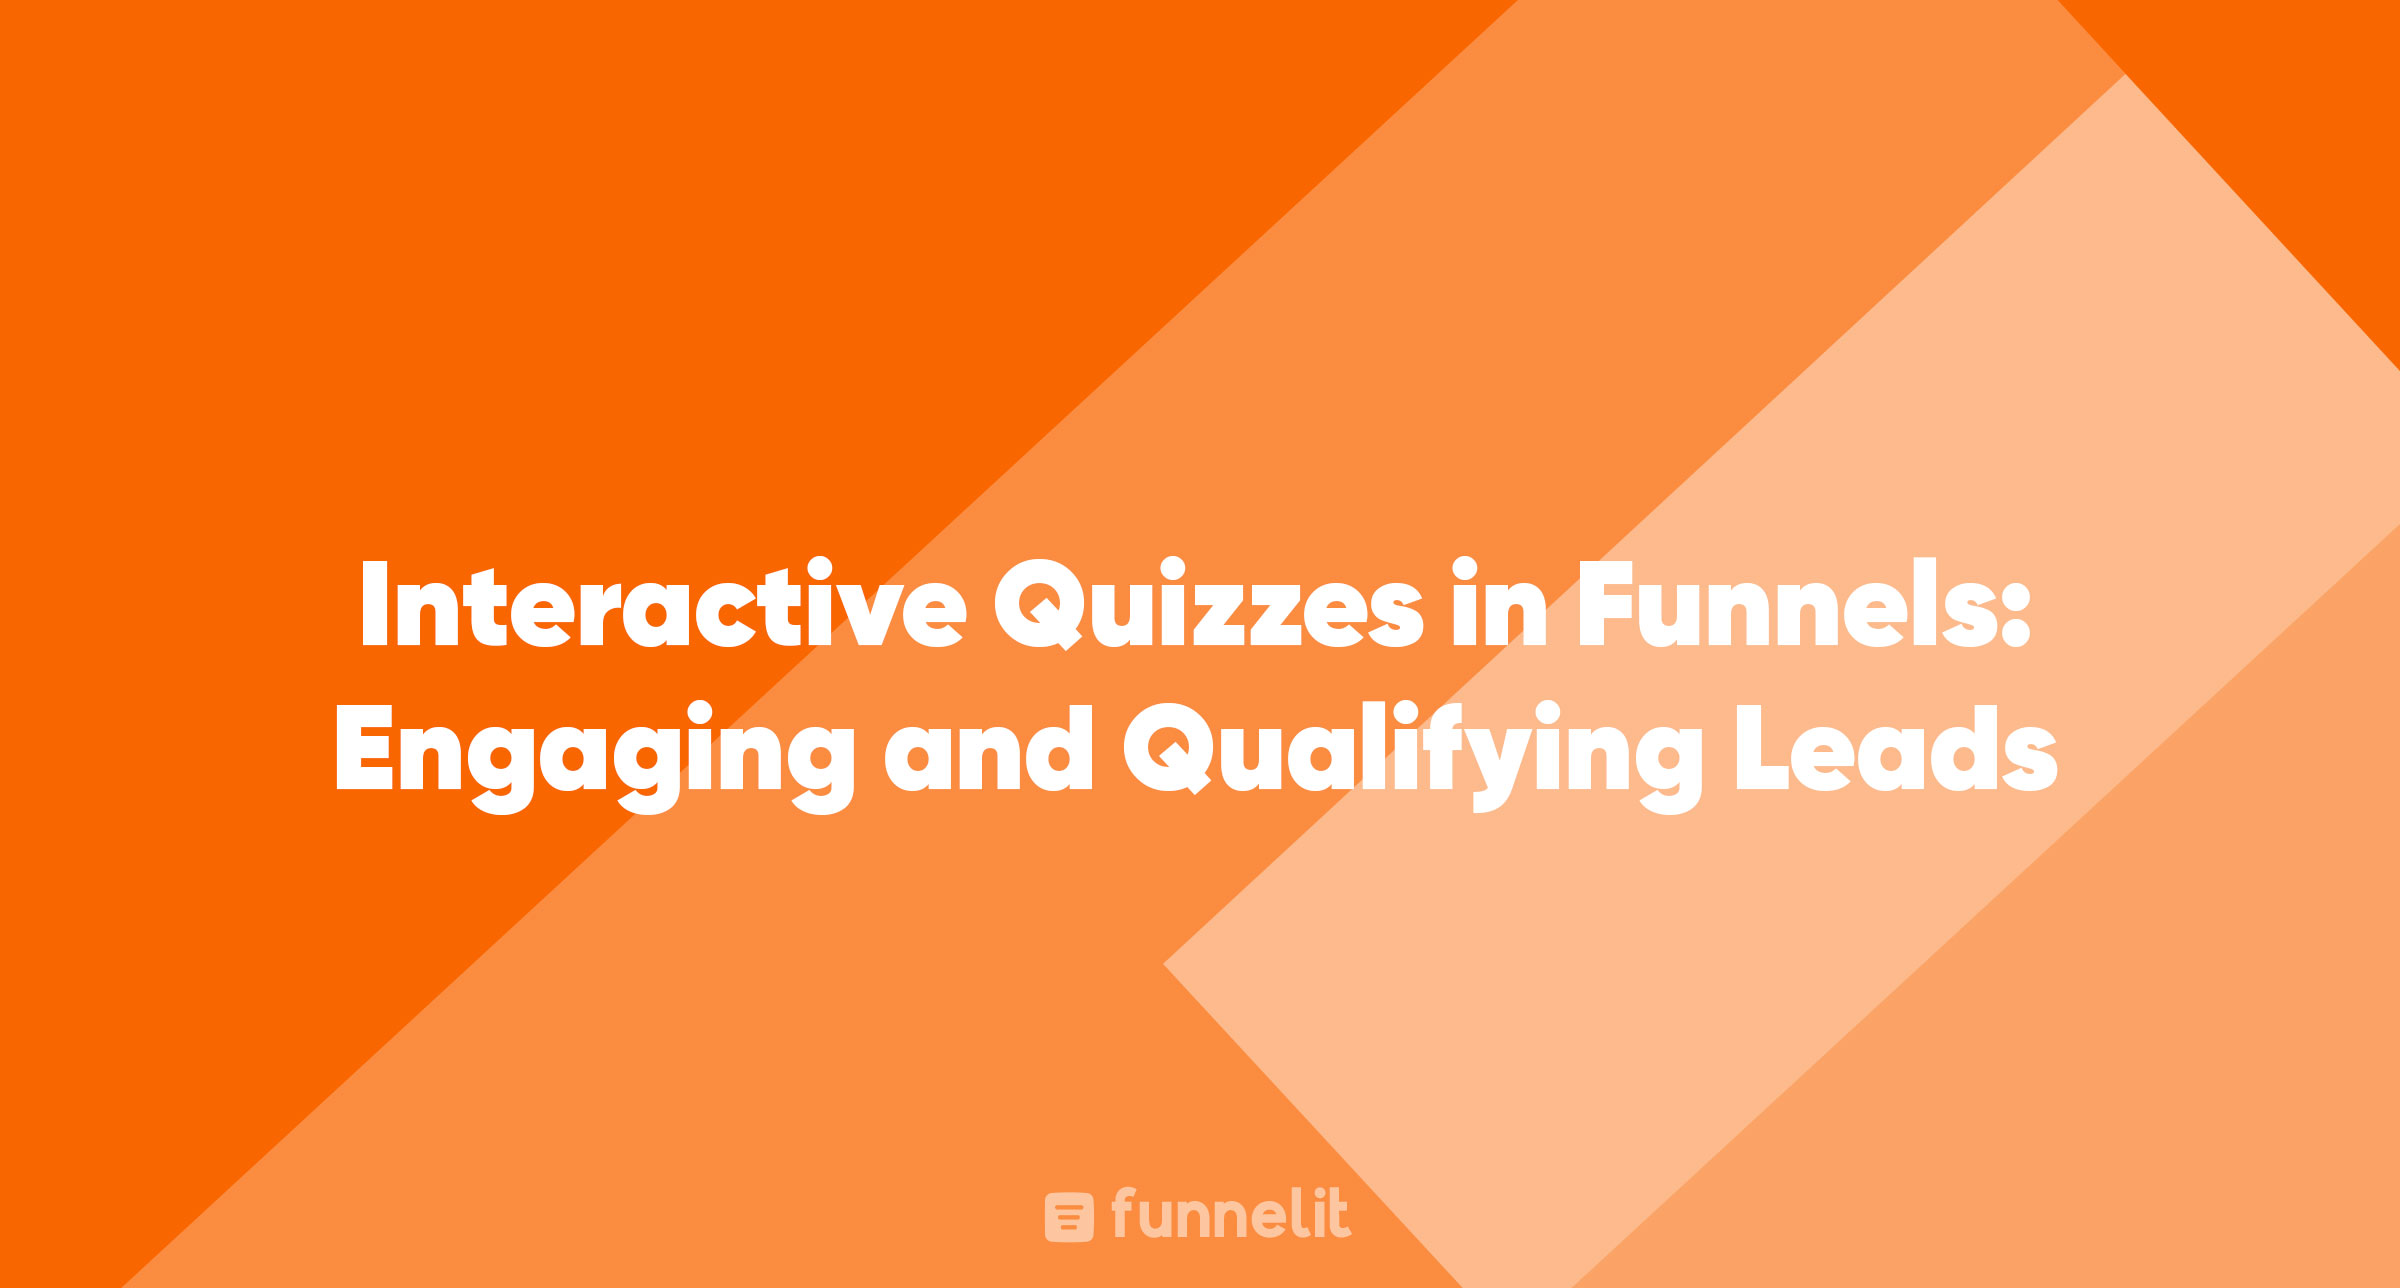 Article | Interactive Quizzes in Funnels: Engaging and Qualifying Leads